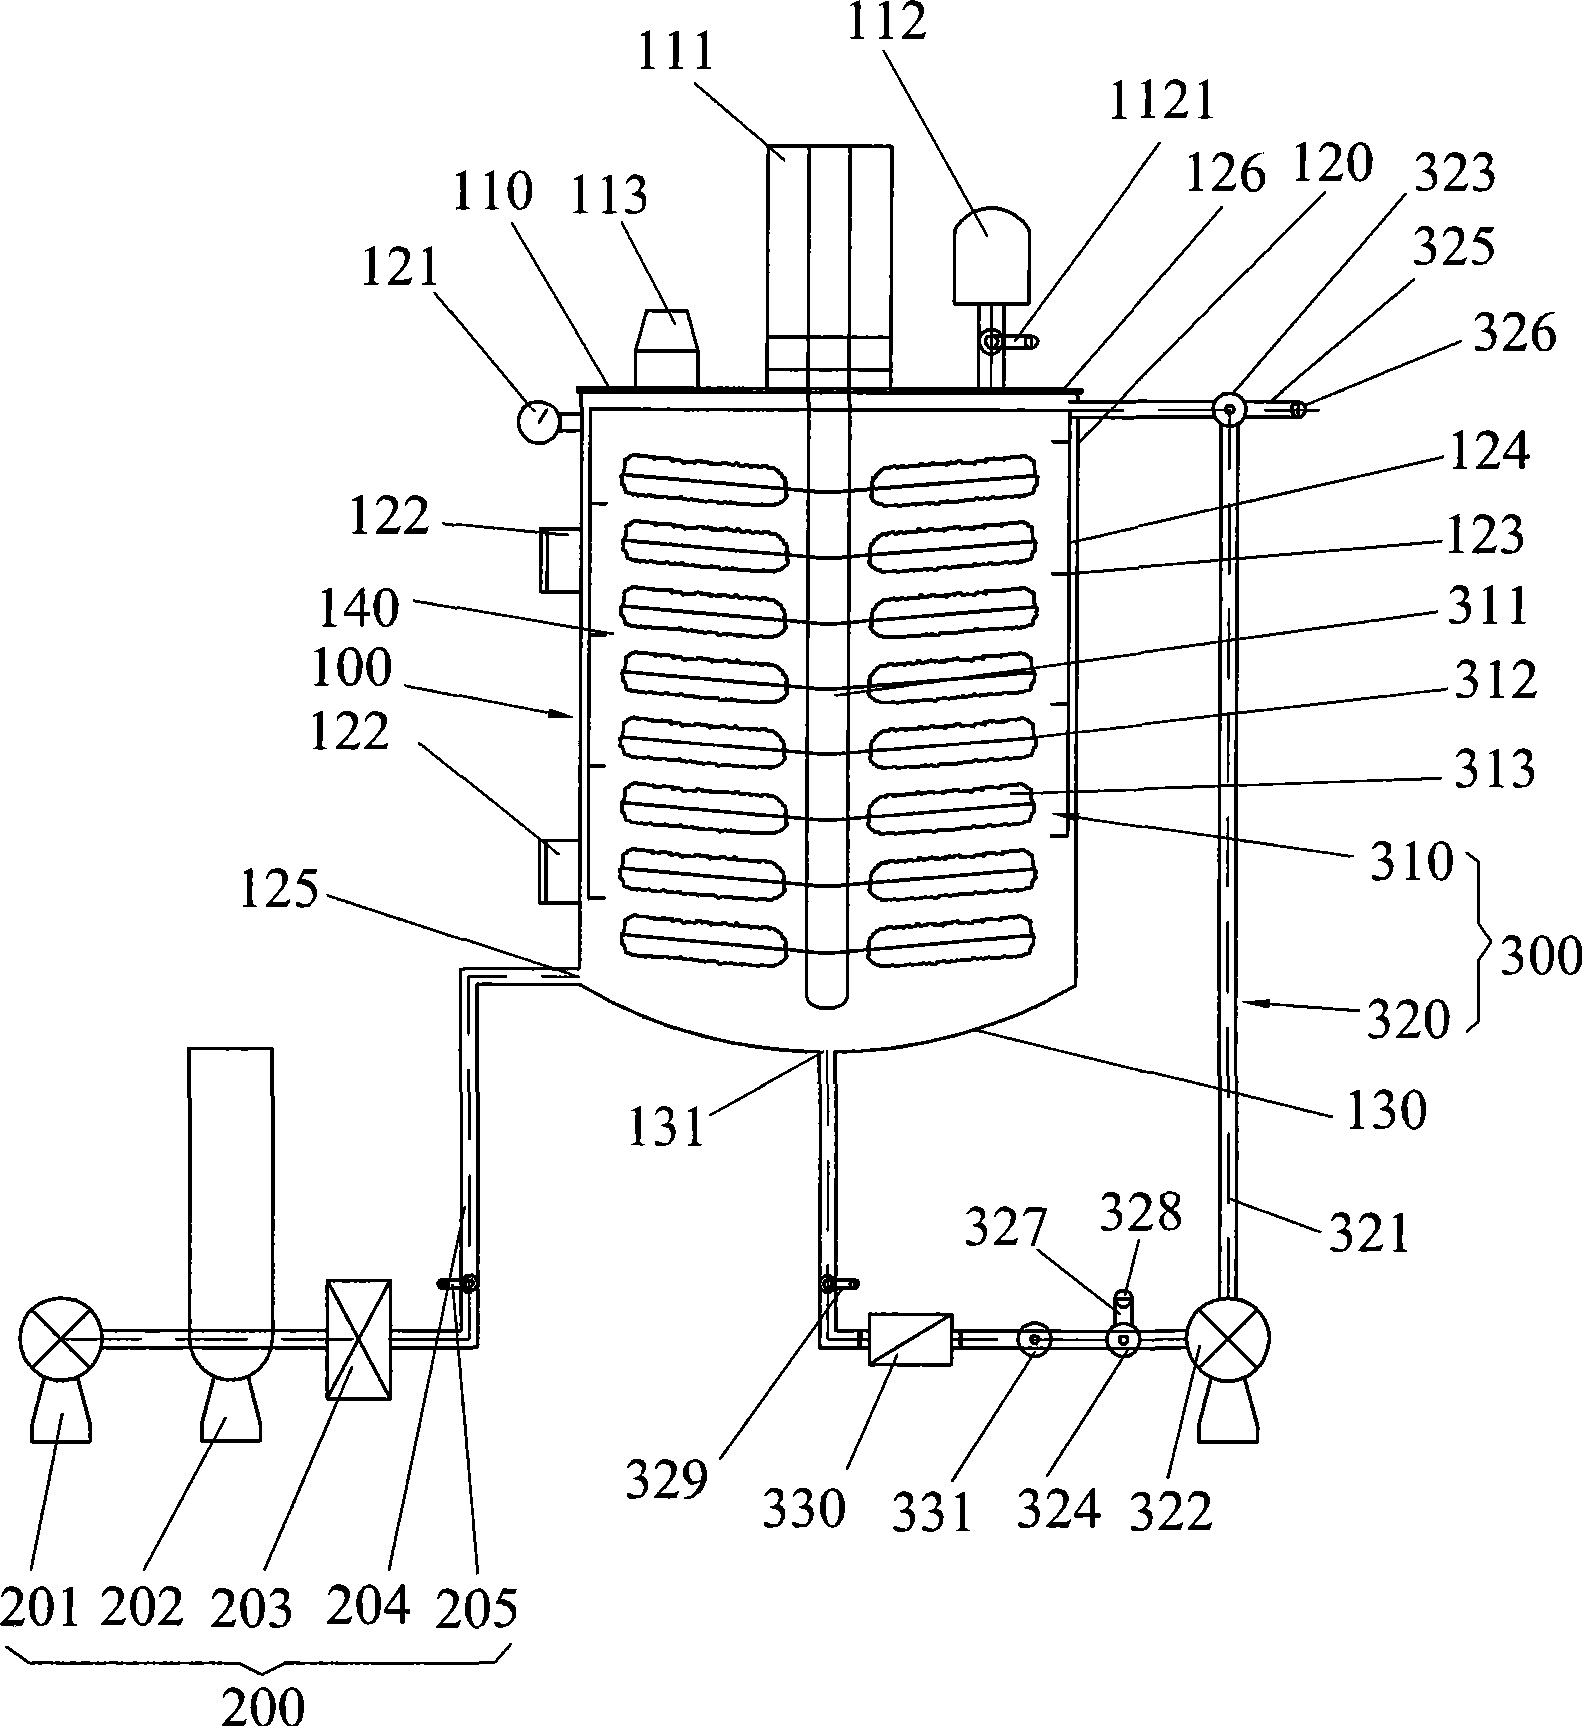 Novel circulation-type packed bed reactor